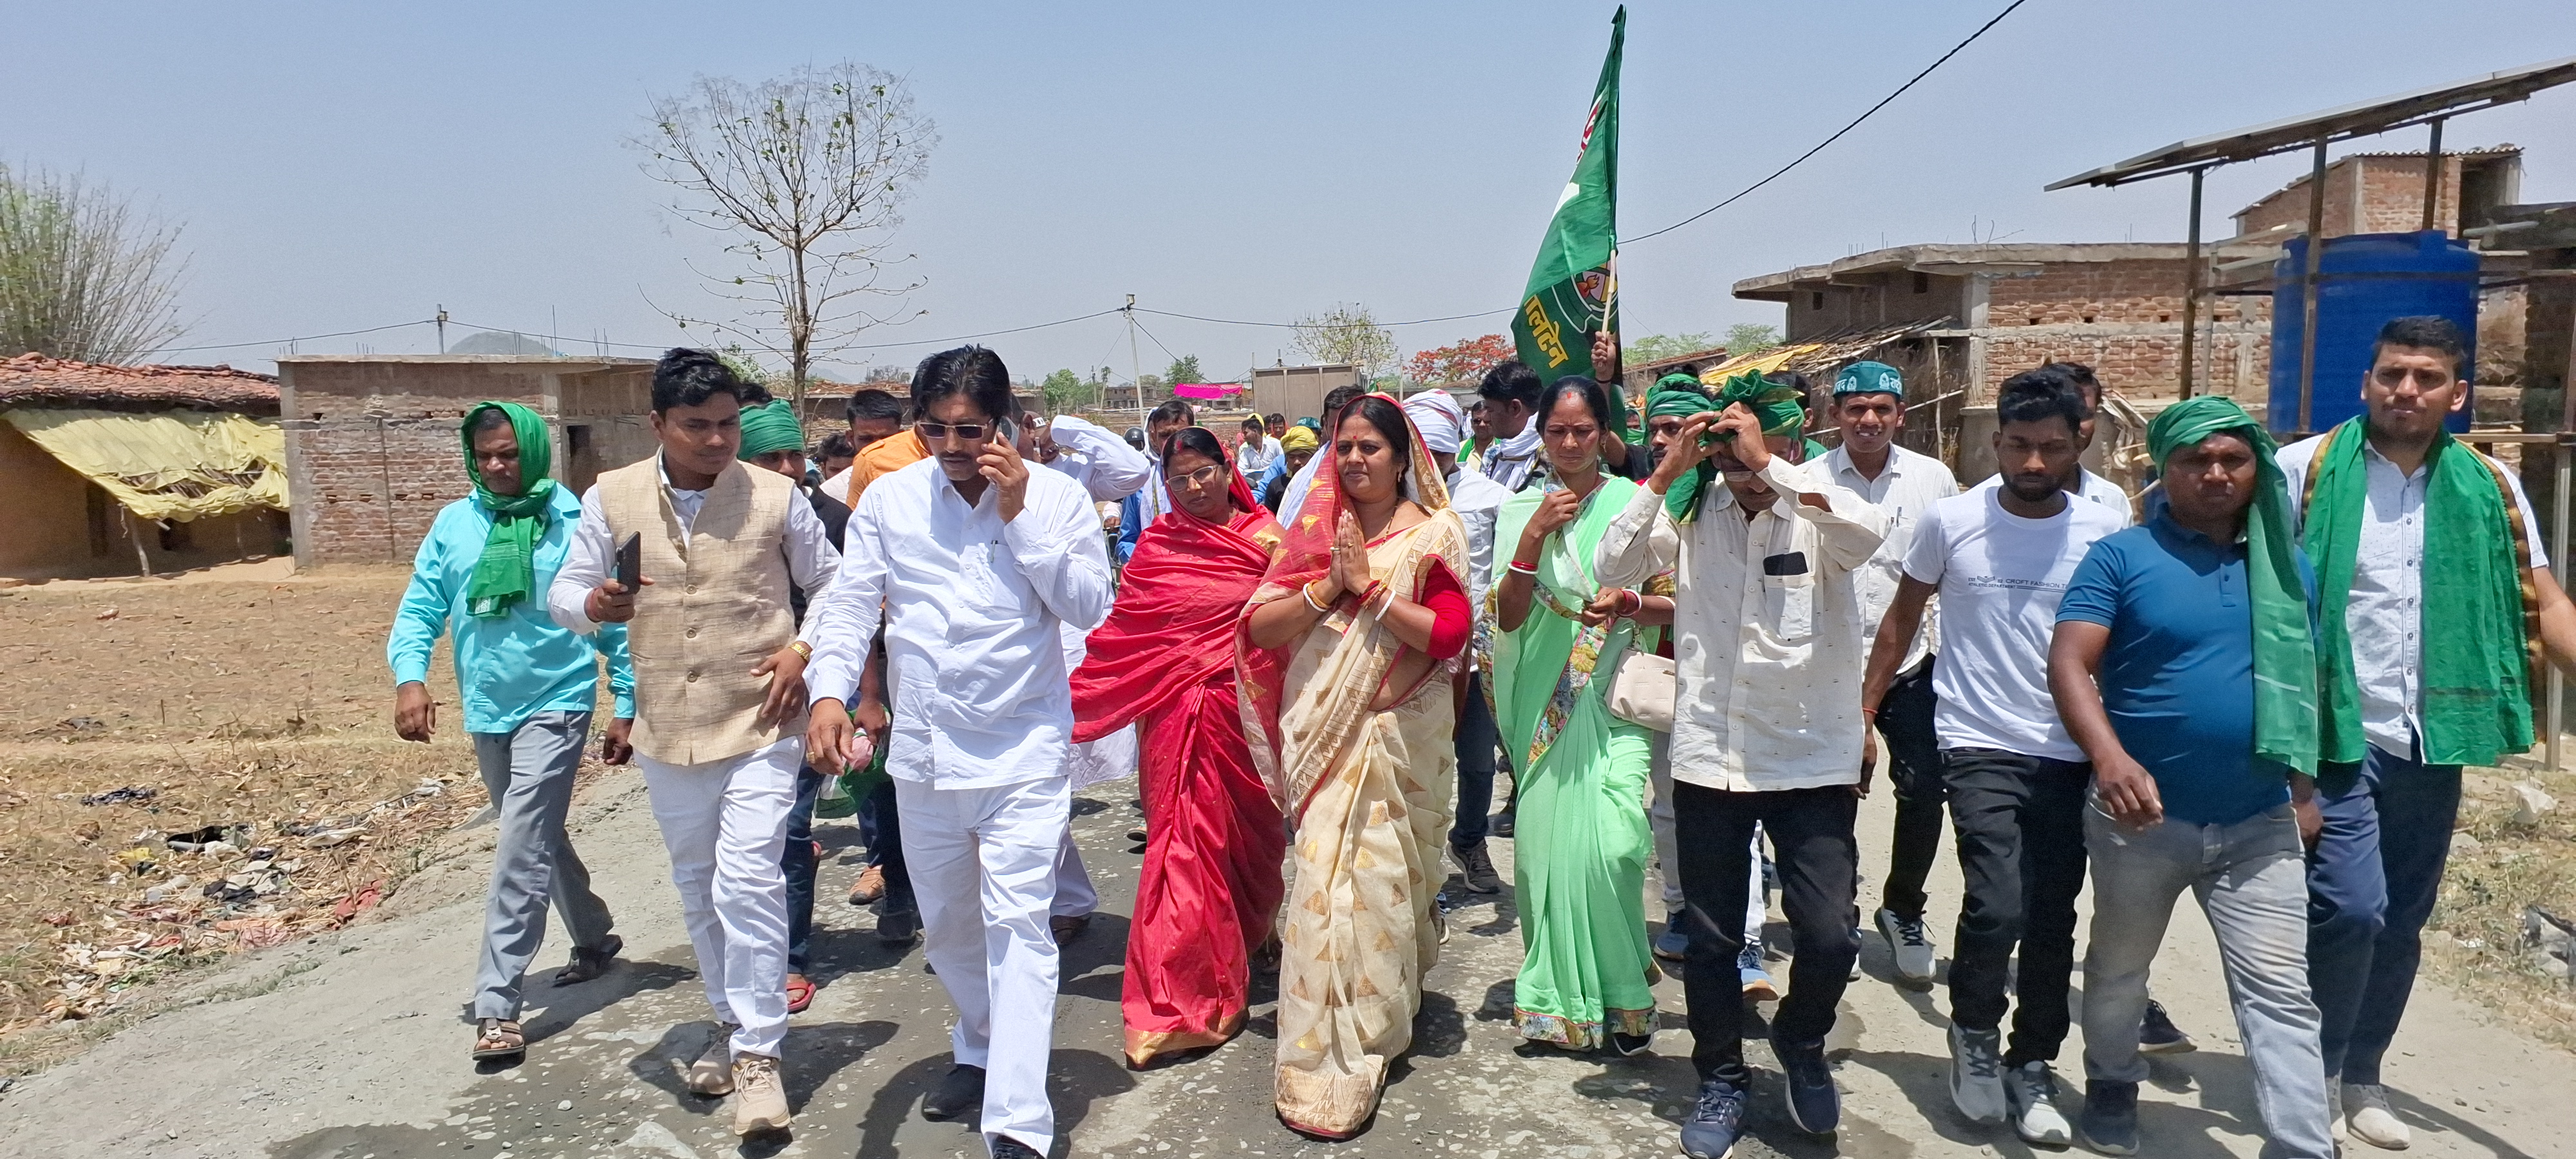 Campaigning in support of RJD